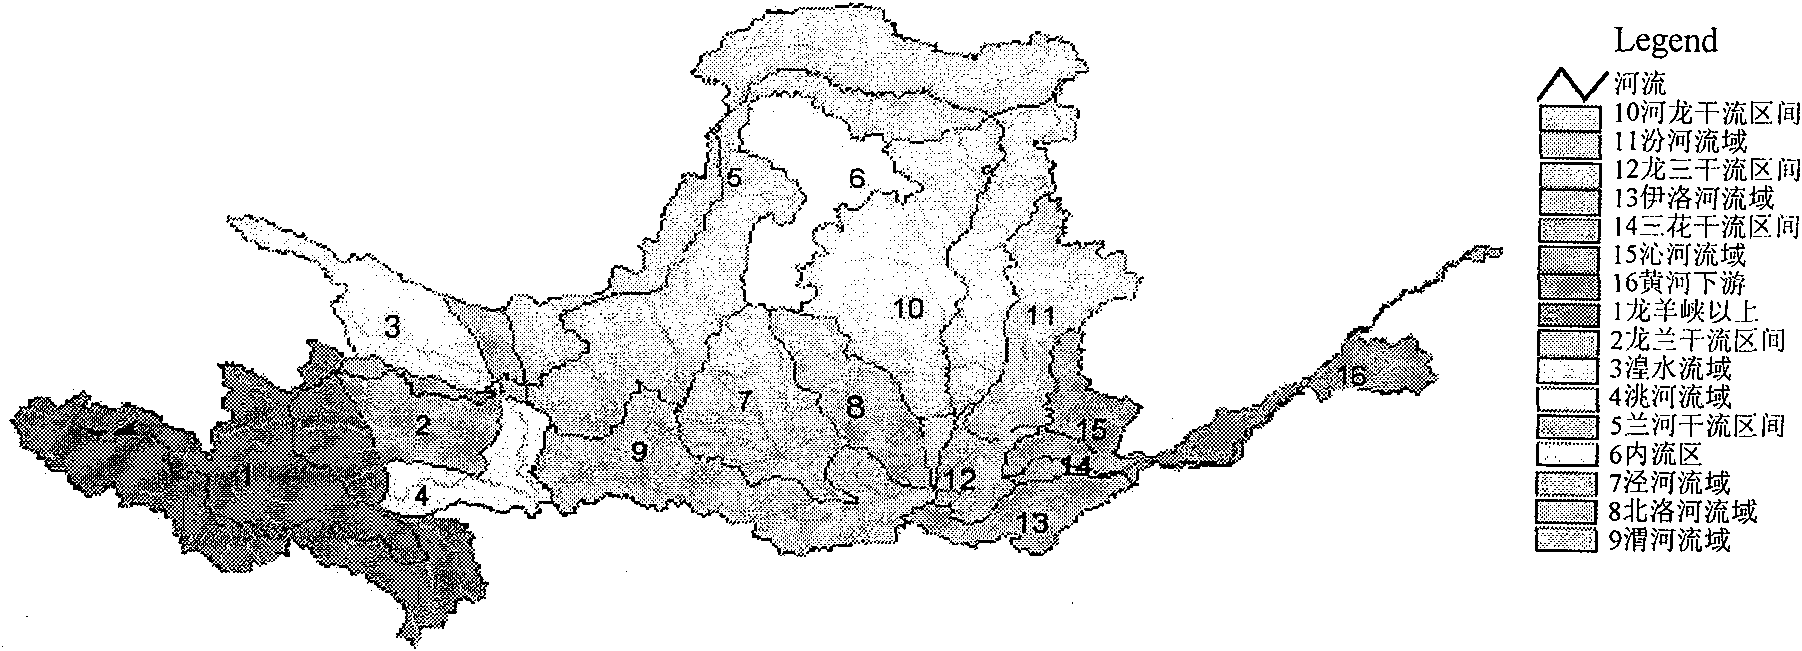 Index and method for ecological water demand zoning and classification